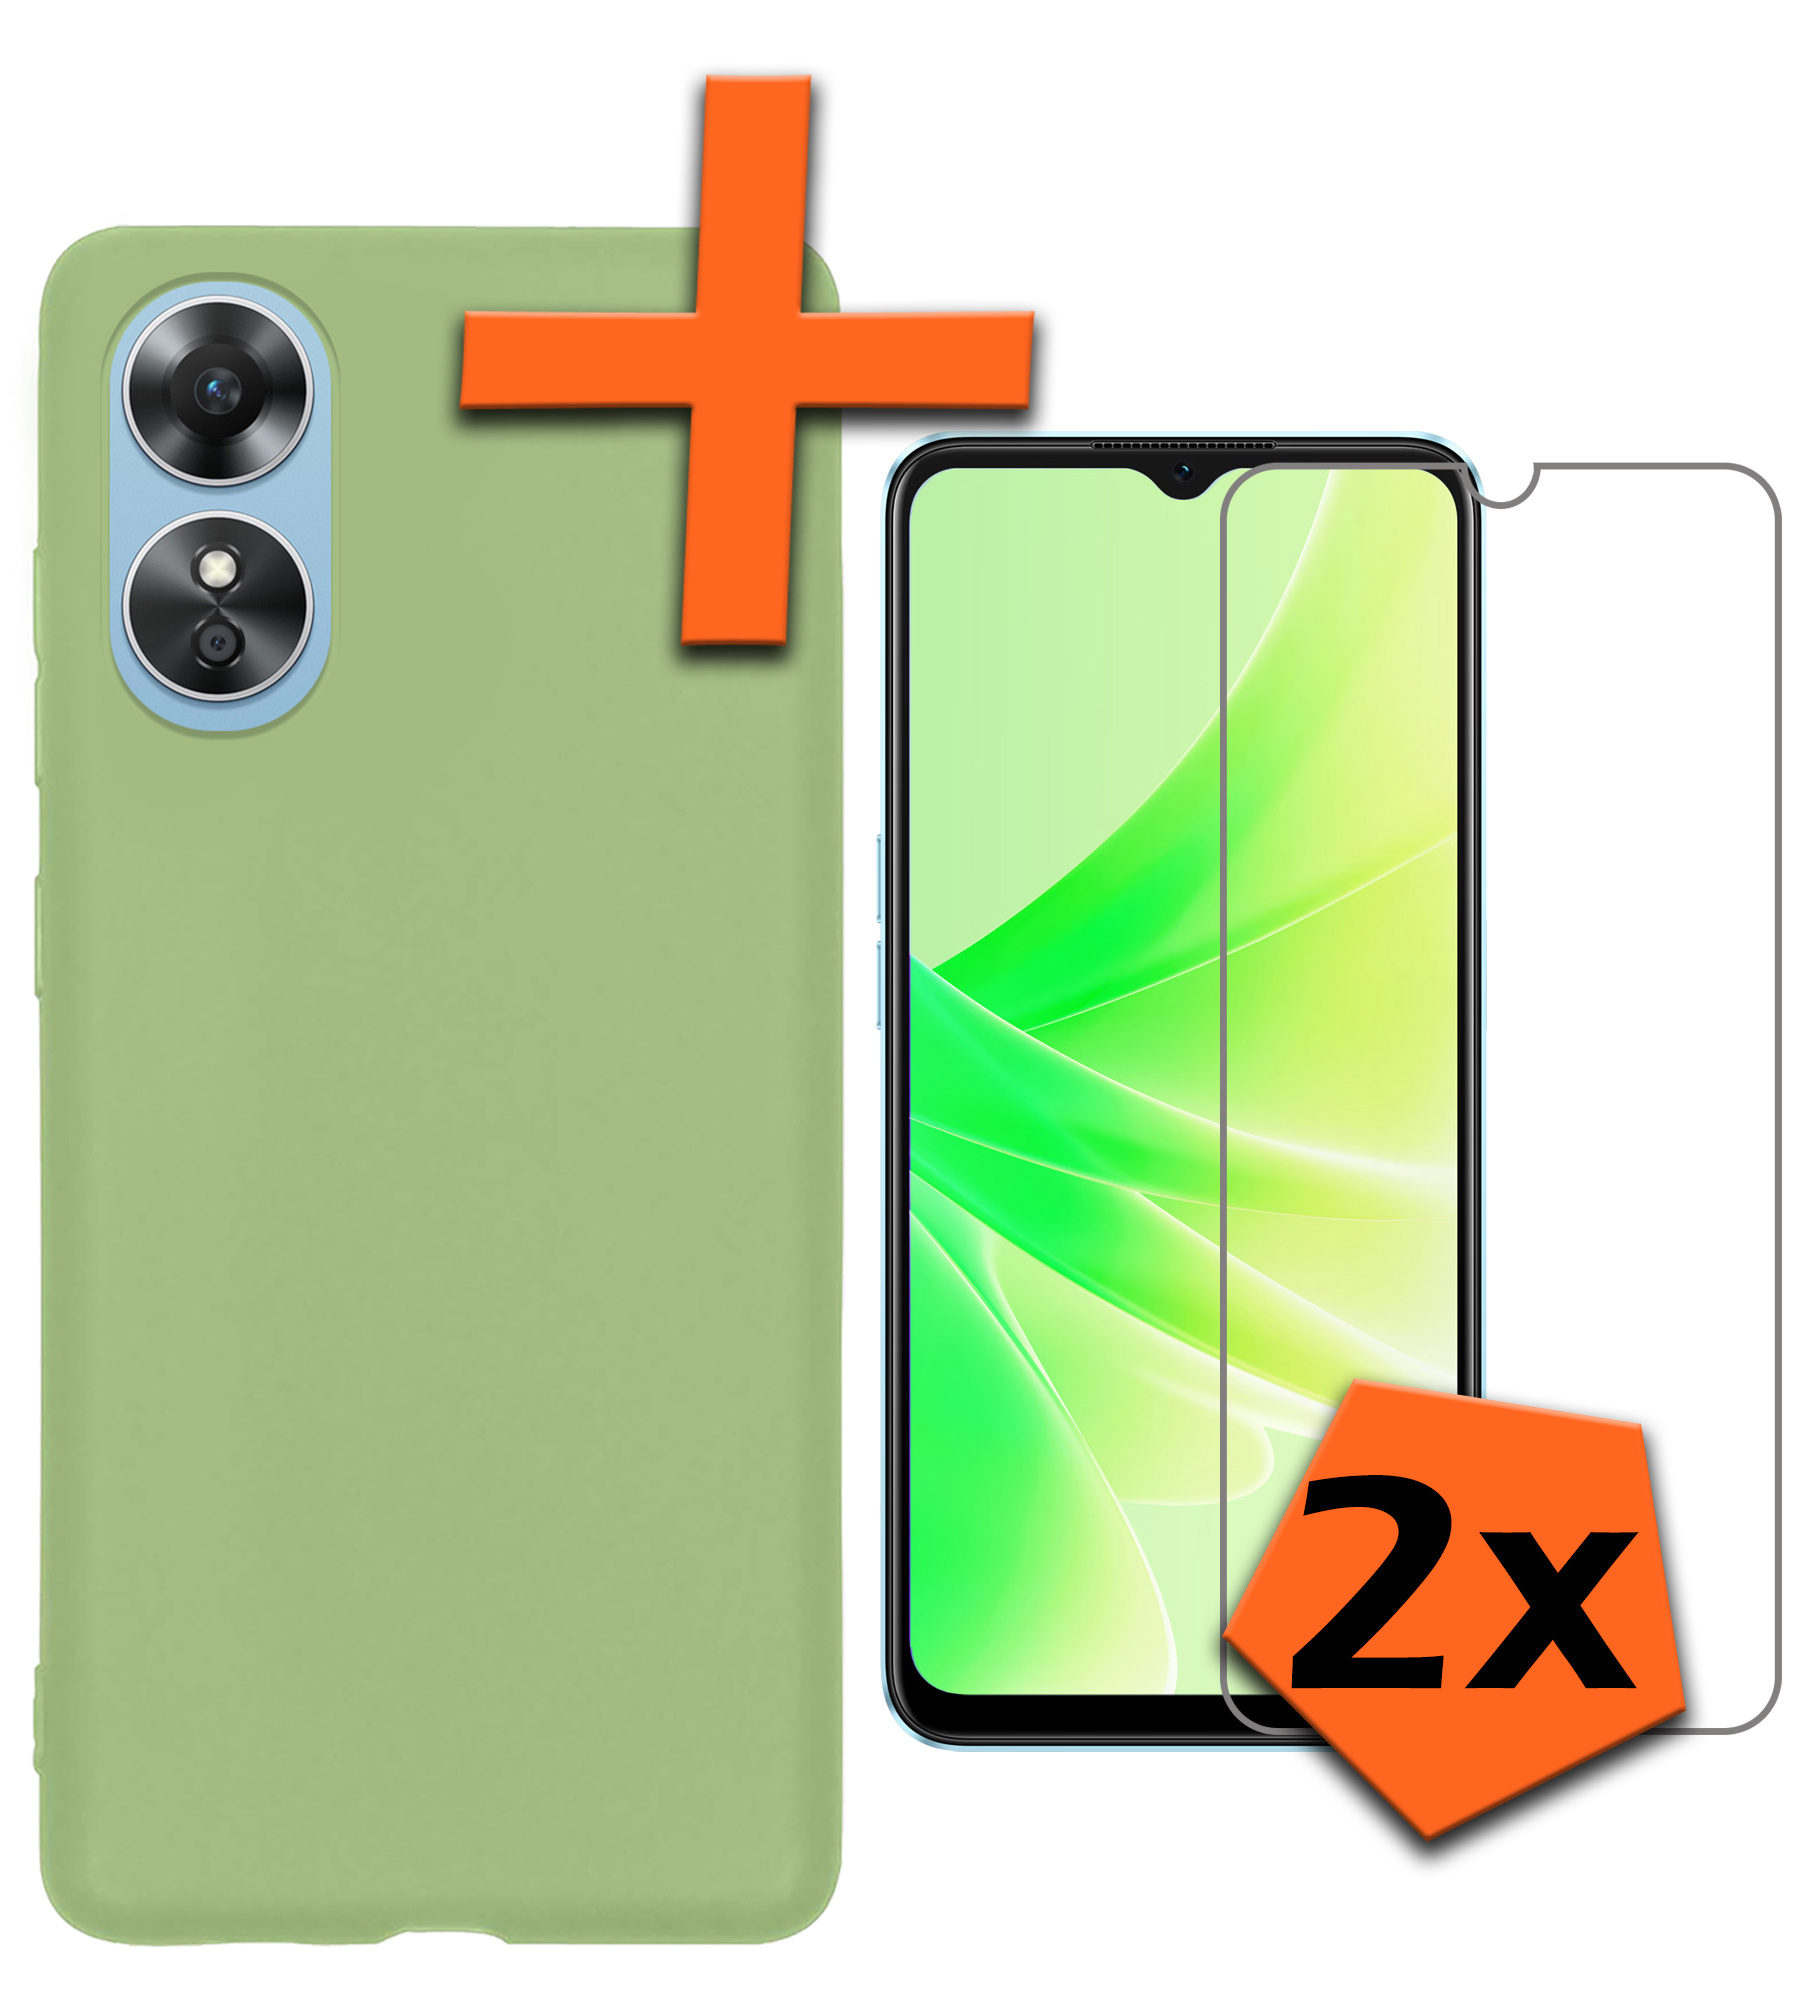 Nomfy OPPO A17 Hoesje Siliconen Case Back Cover Met 2x Screenprotector - OPPO A17 Hoes Cover Silicone - Groen